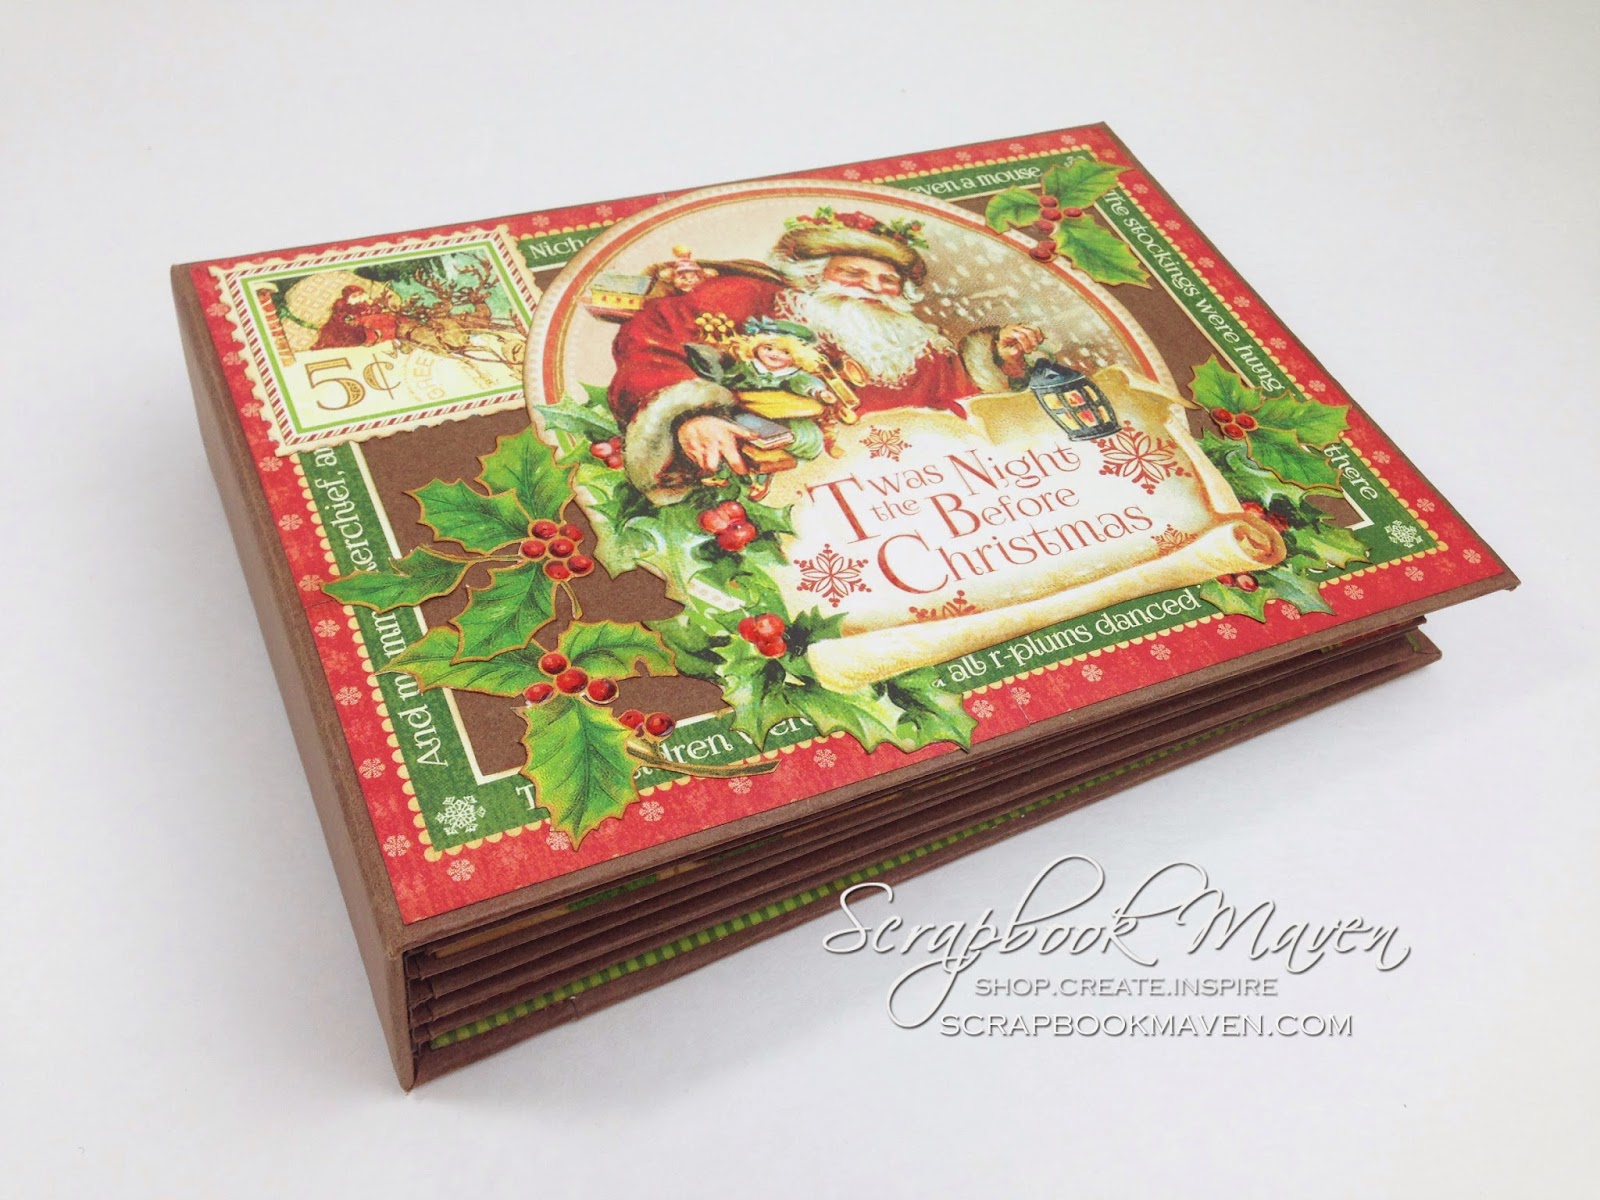 Scrapbook Maven mini album inspiration using Graphic 45 'Twas the Night Before Christmas Paper Collection